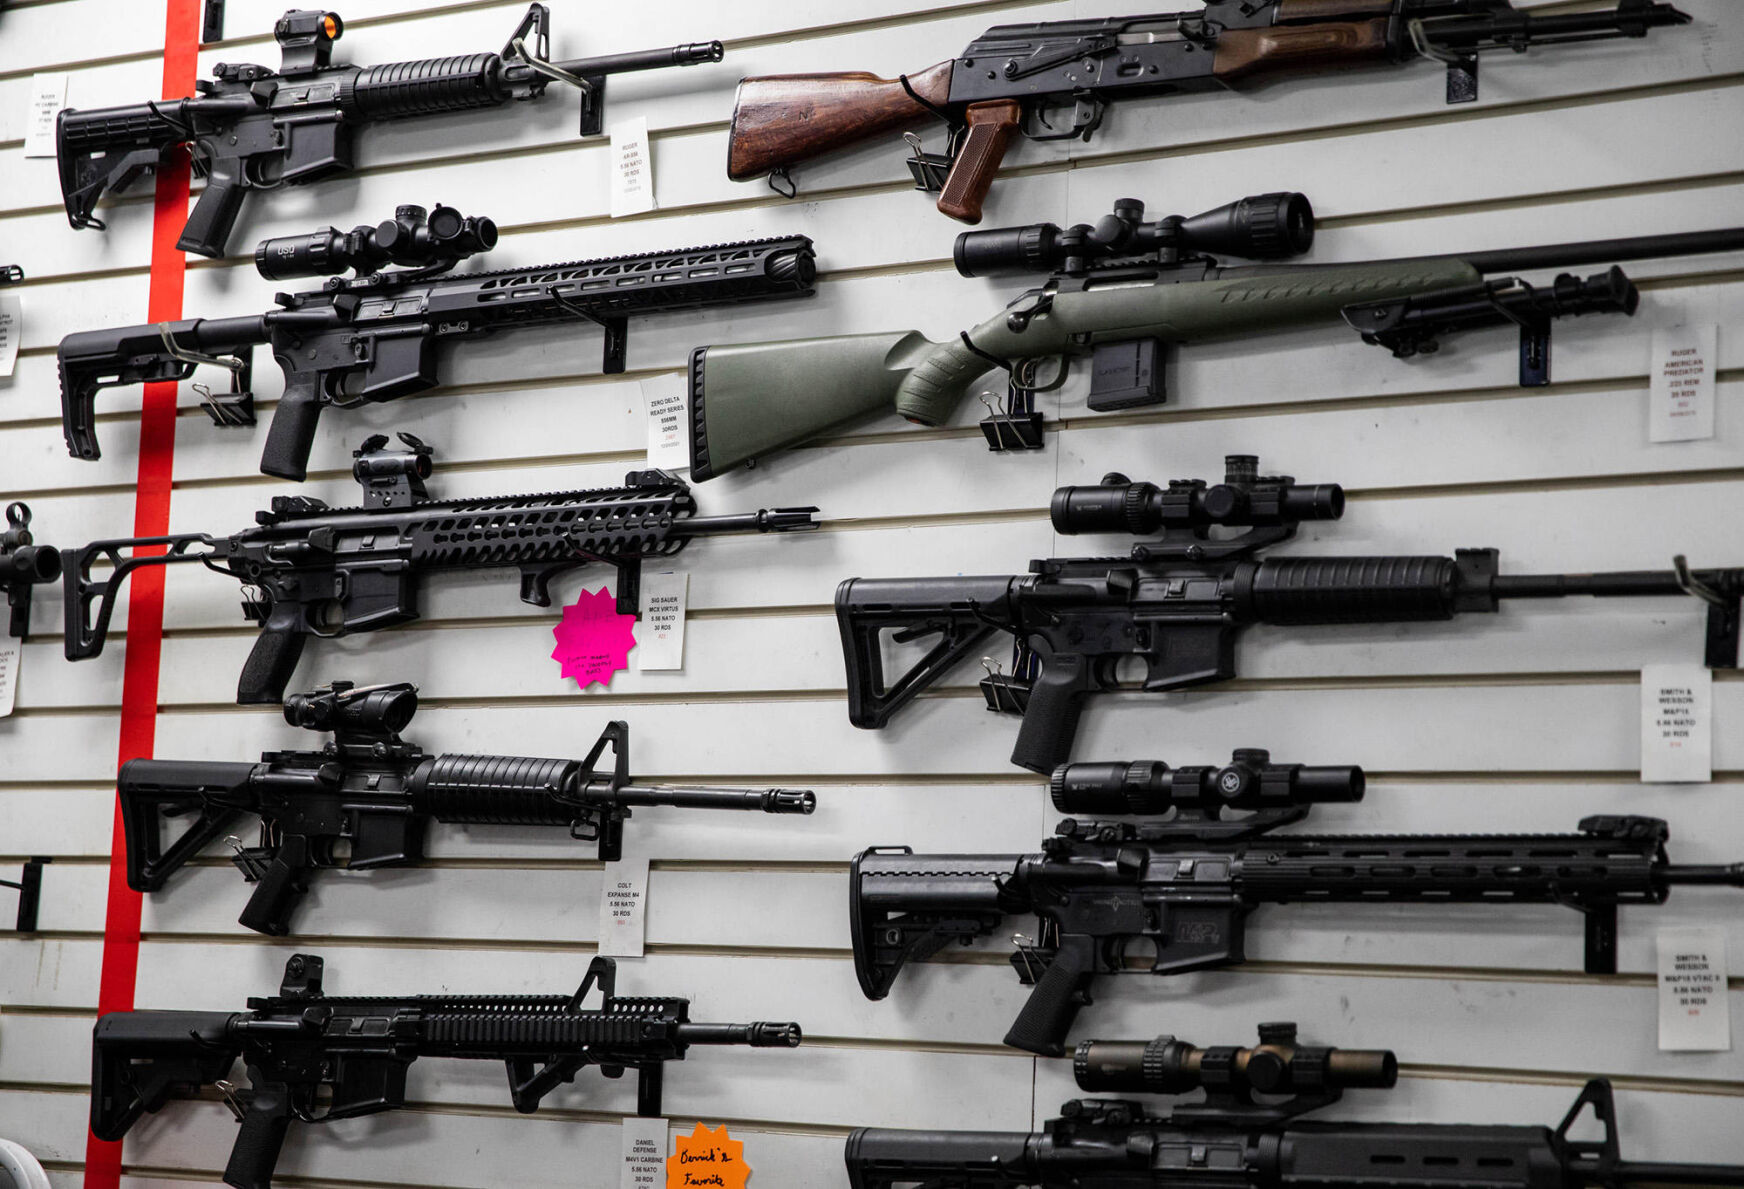 Oregon #39 s Extreme Gun Control Law Upheld: What Does This Mean for Gun